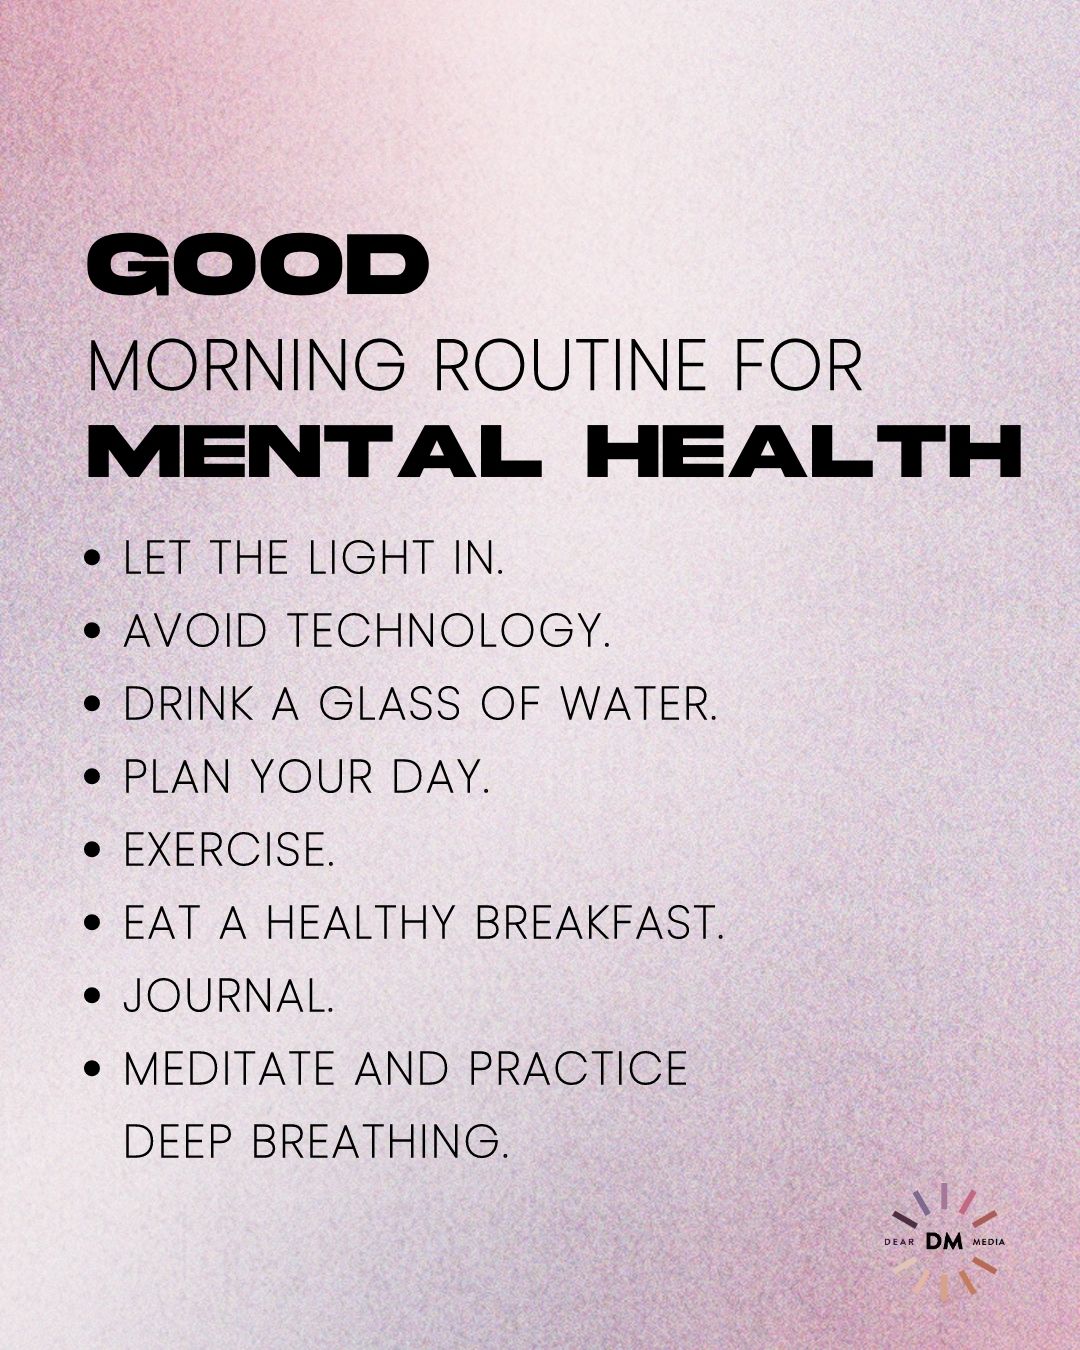 A bulleted list of items that make for a good morning routine for mental health